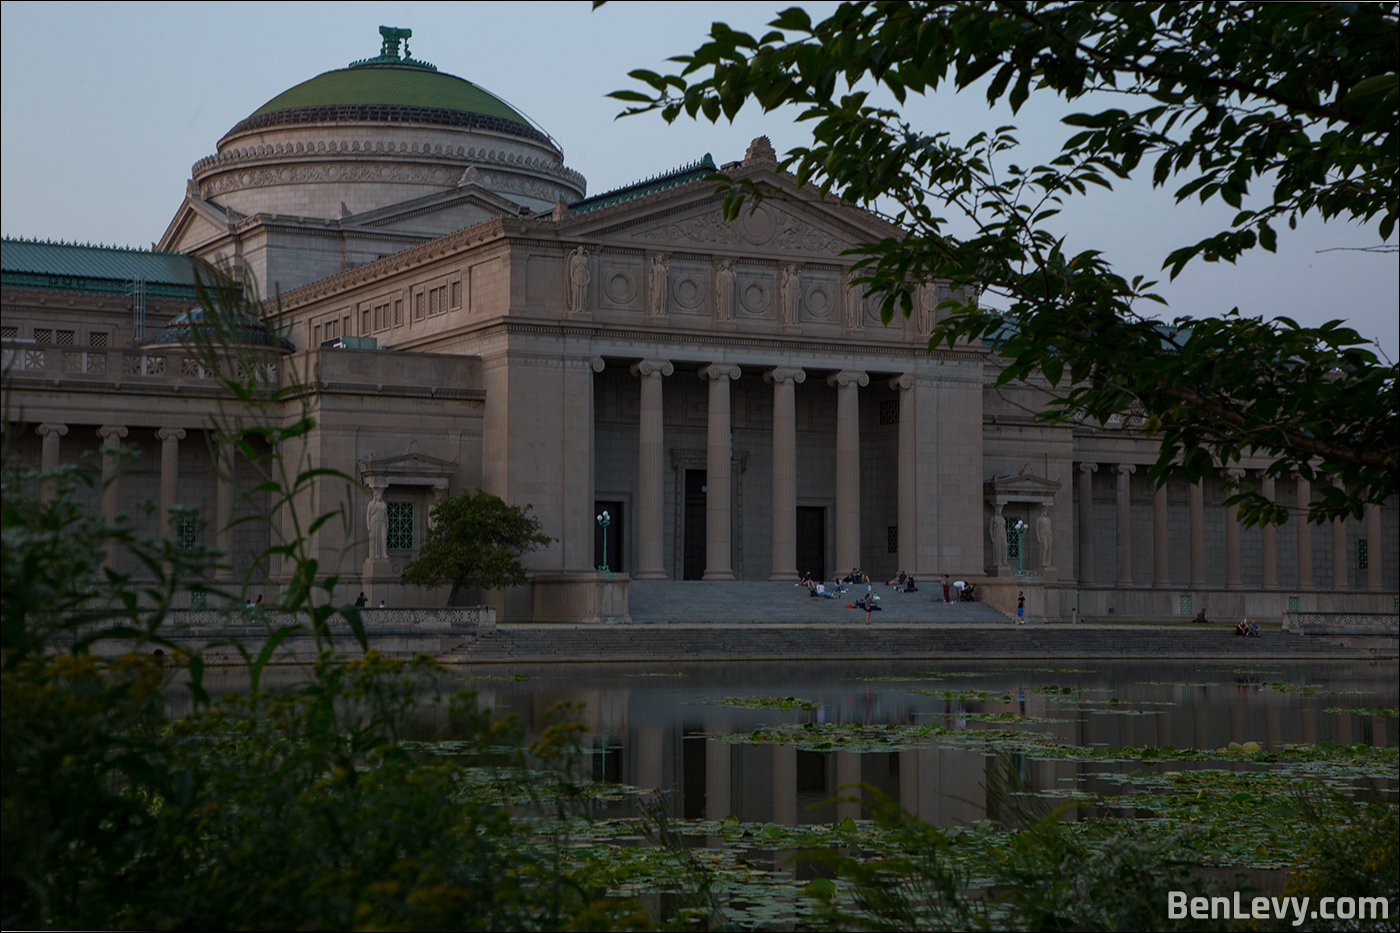 The South Portico of the Museum of Science and Industry in Chicago